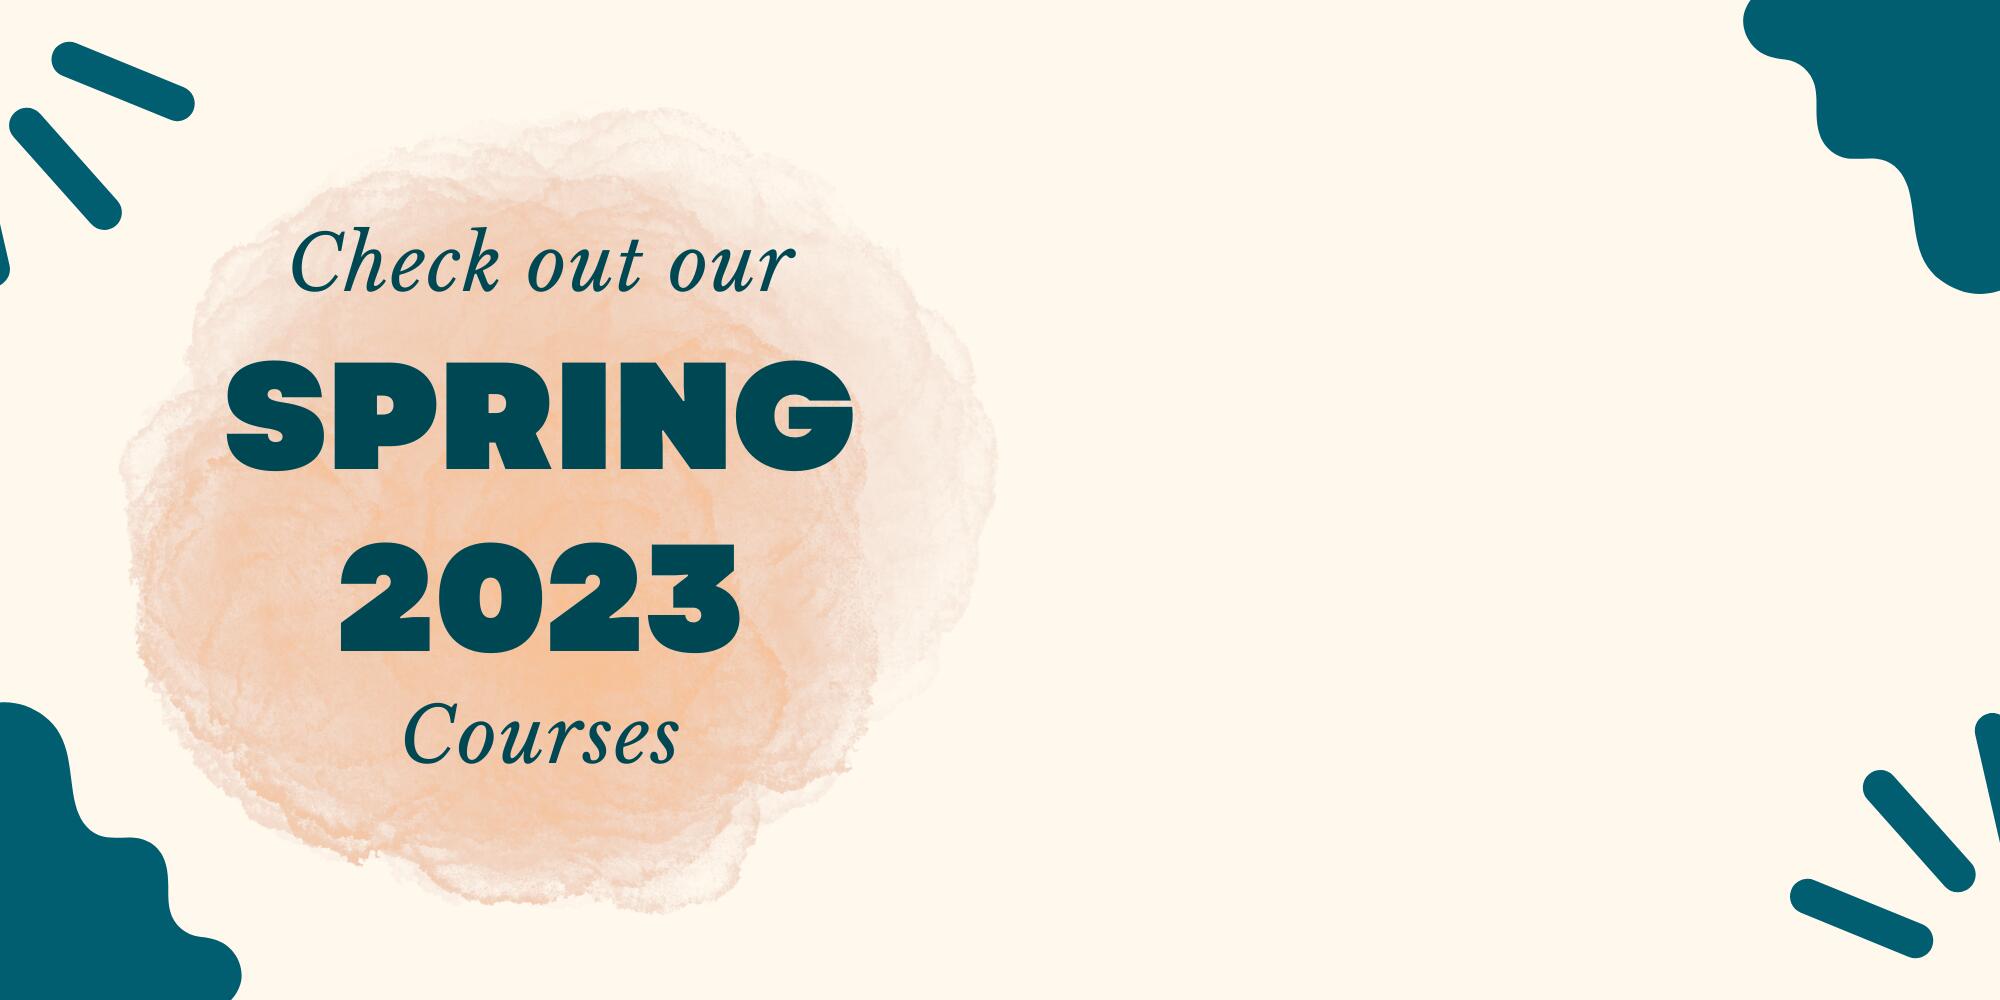 Check out our Spring 2023 Courses